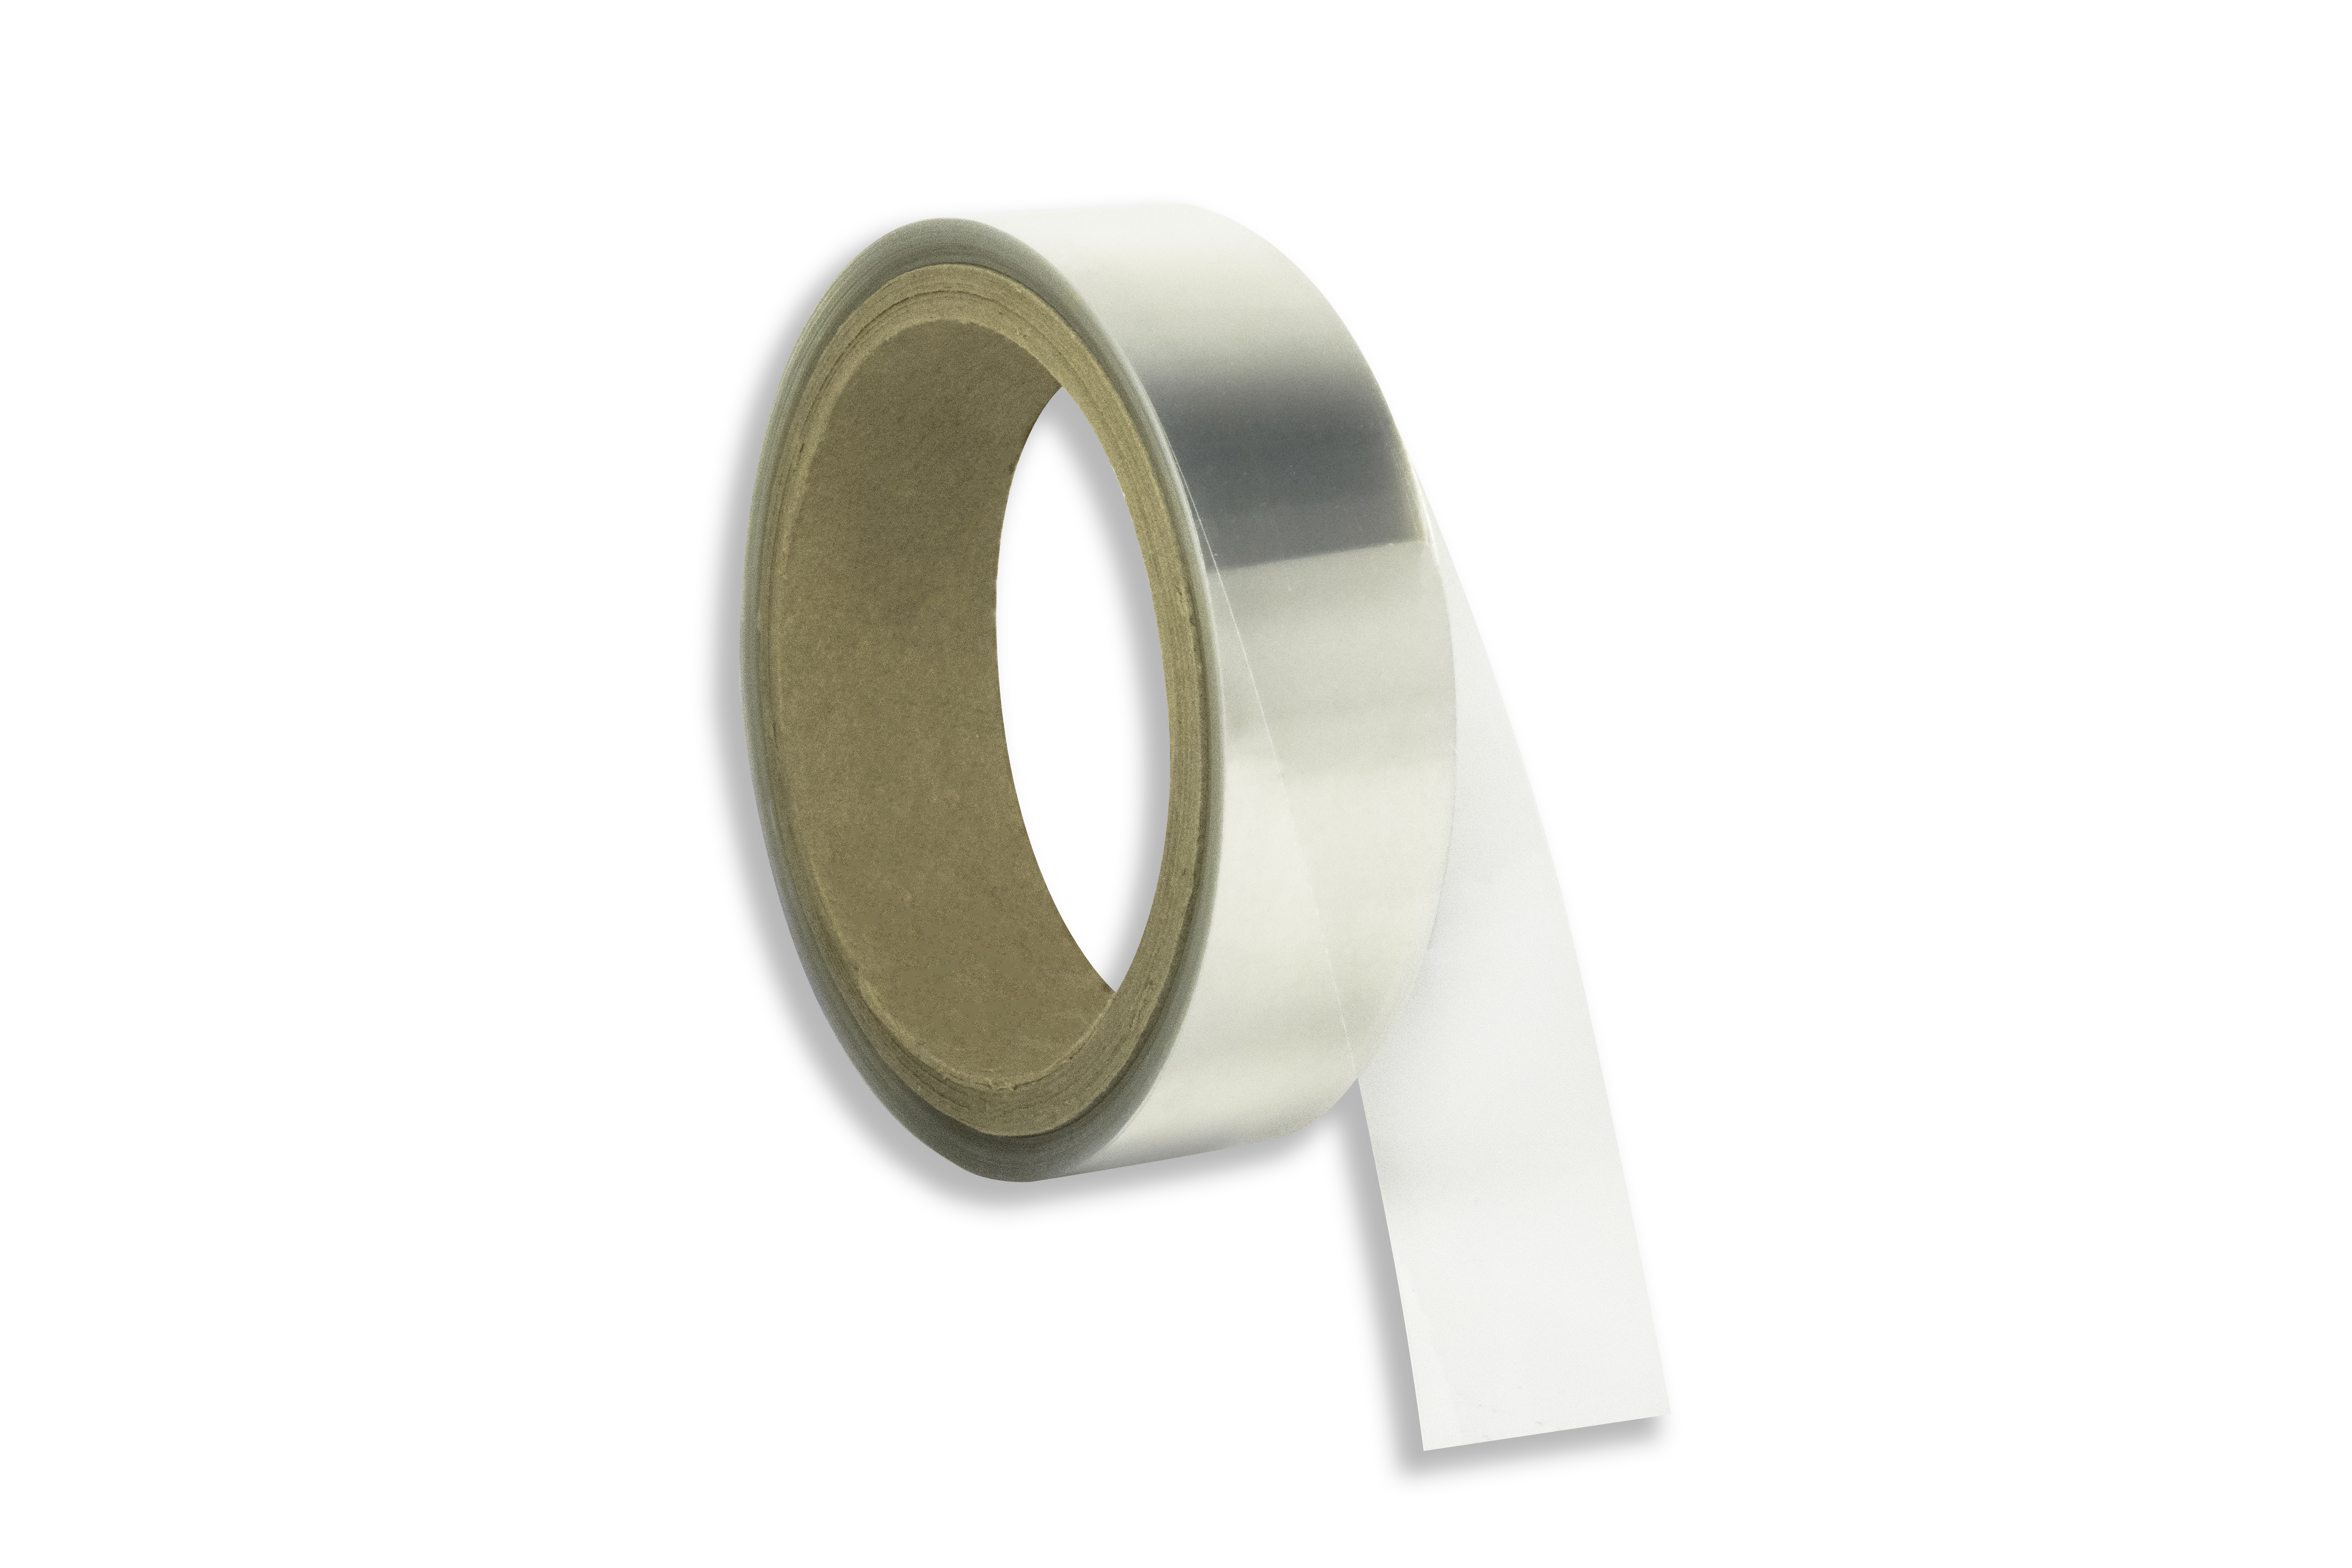 Heat Resistant High Temperature Adhesive Tape 1x Roll. (100Ft Long Roll)